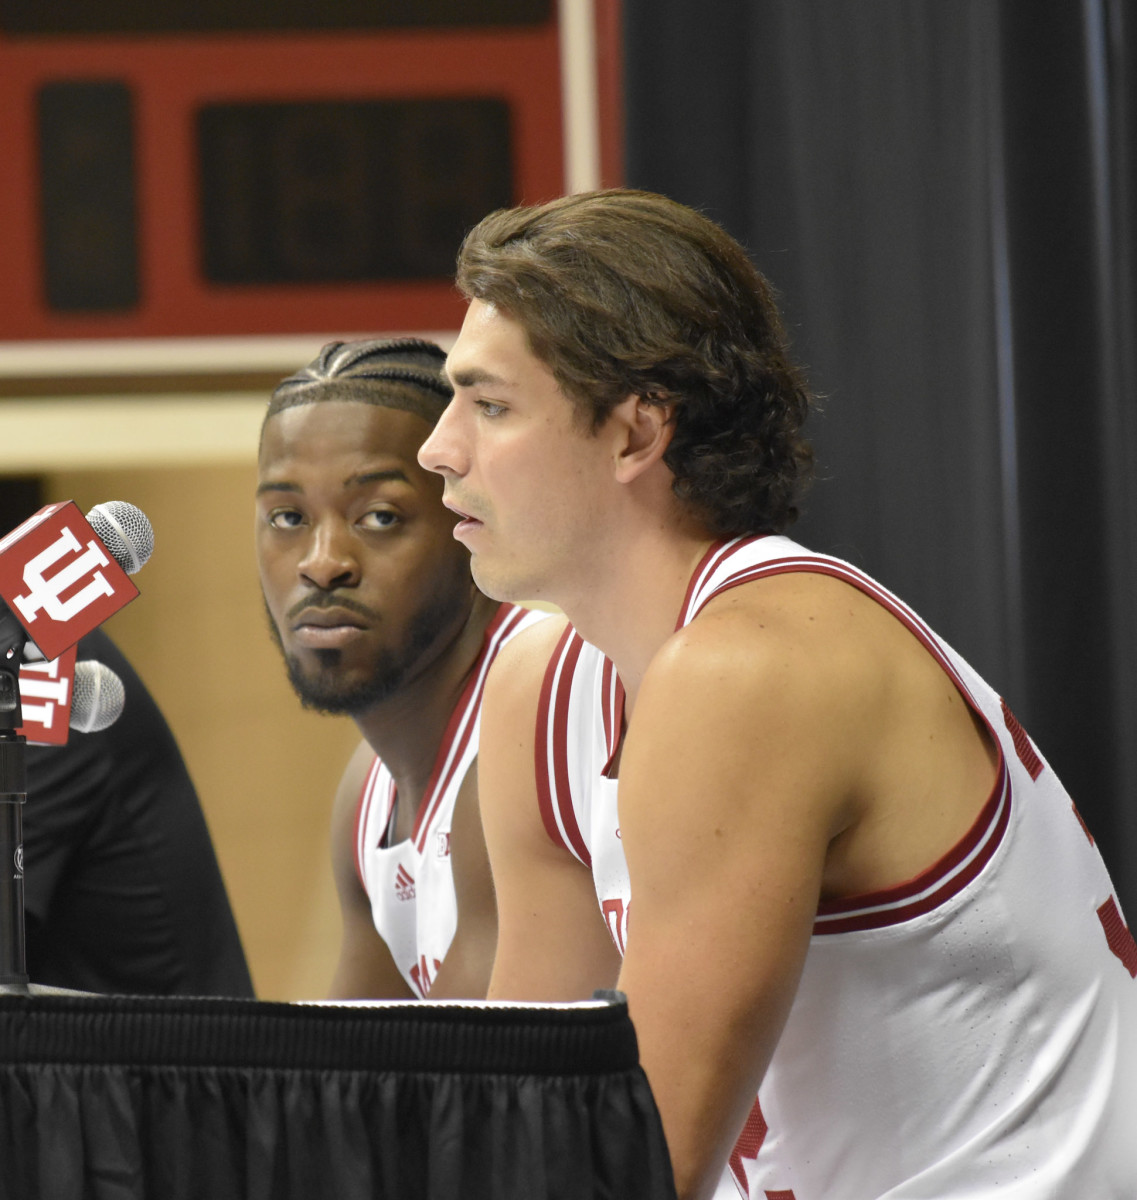 Xavier Johnson and Trey Galloway take turns answering questions from the media on IU Basketball Media Day at Simon Skjodt Assembly Hall on Wednesday.